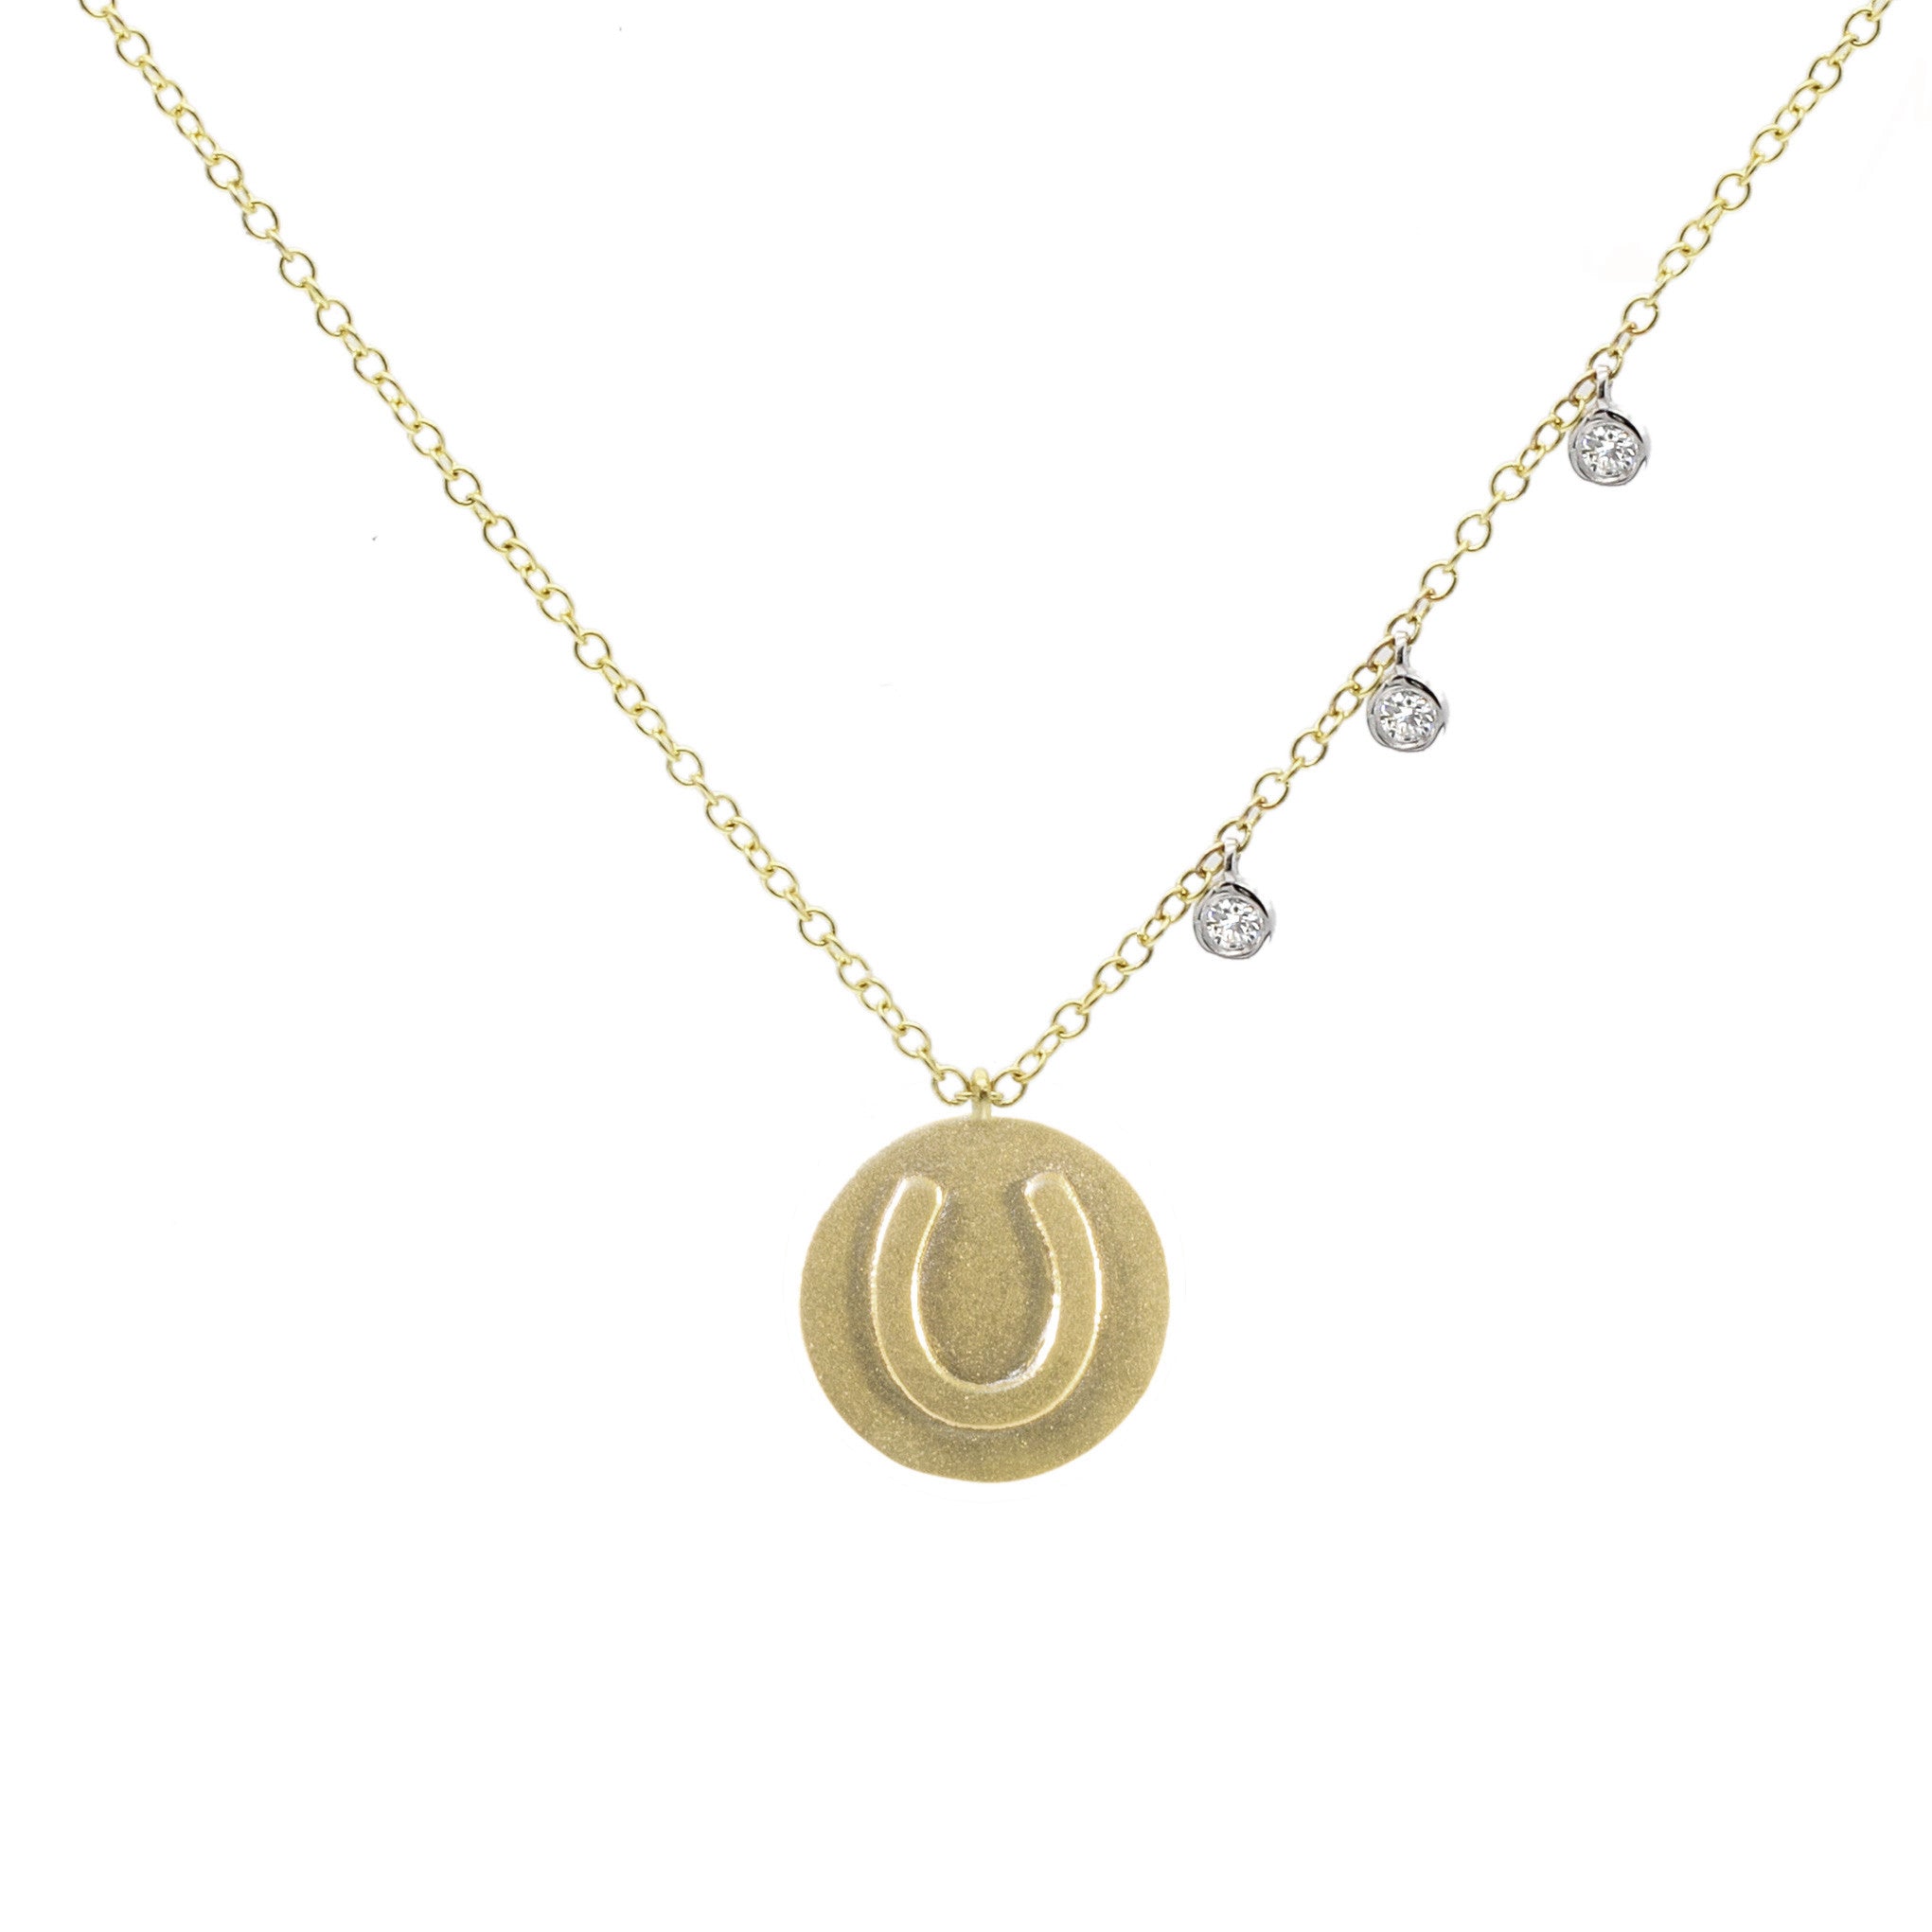 Meira T 14k Yellow Gold Disc Embossed with Horseshoe